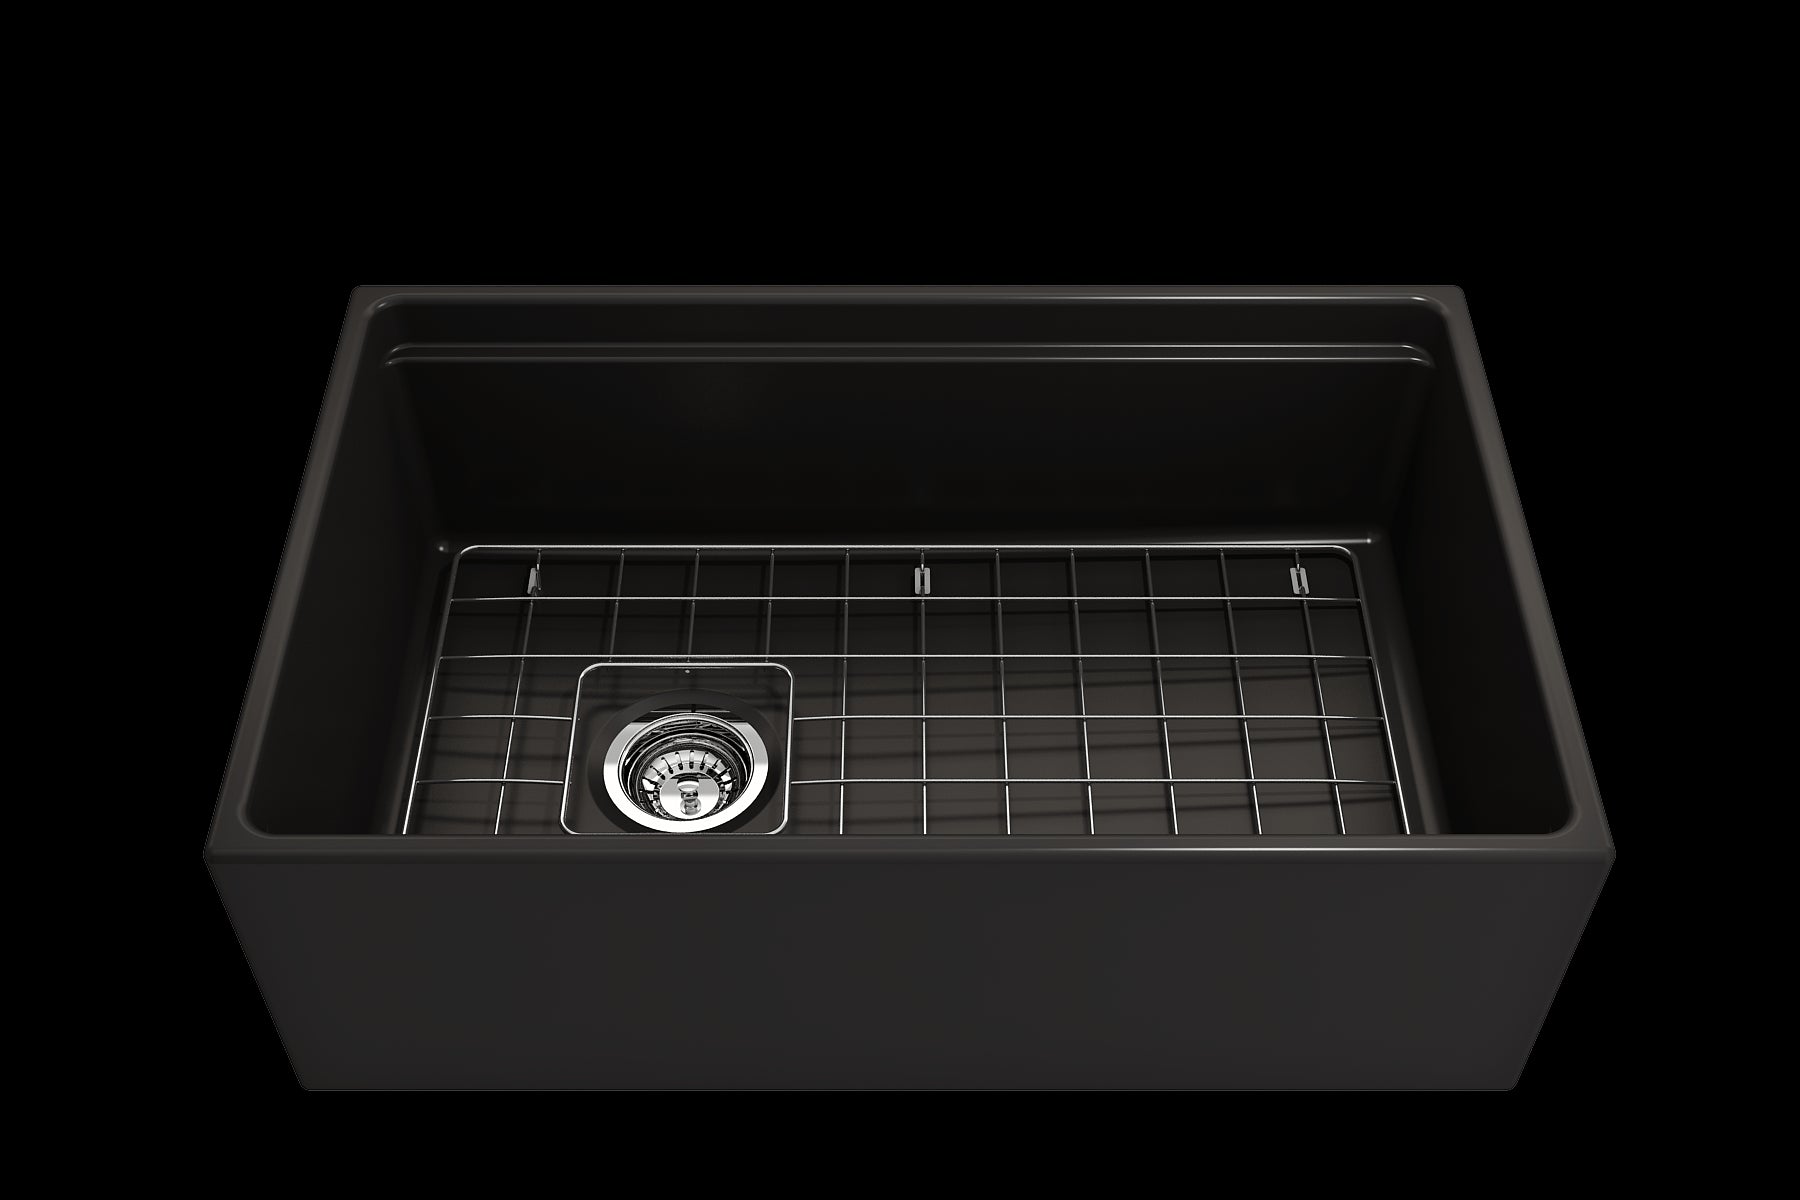 BOCCHI CONTEMPO 30" Fireclay Farmhouse Step Rim With Integrated Work Station Single Bowl Kitchen Sink With Accessories - Matte Black